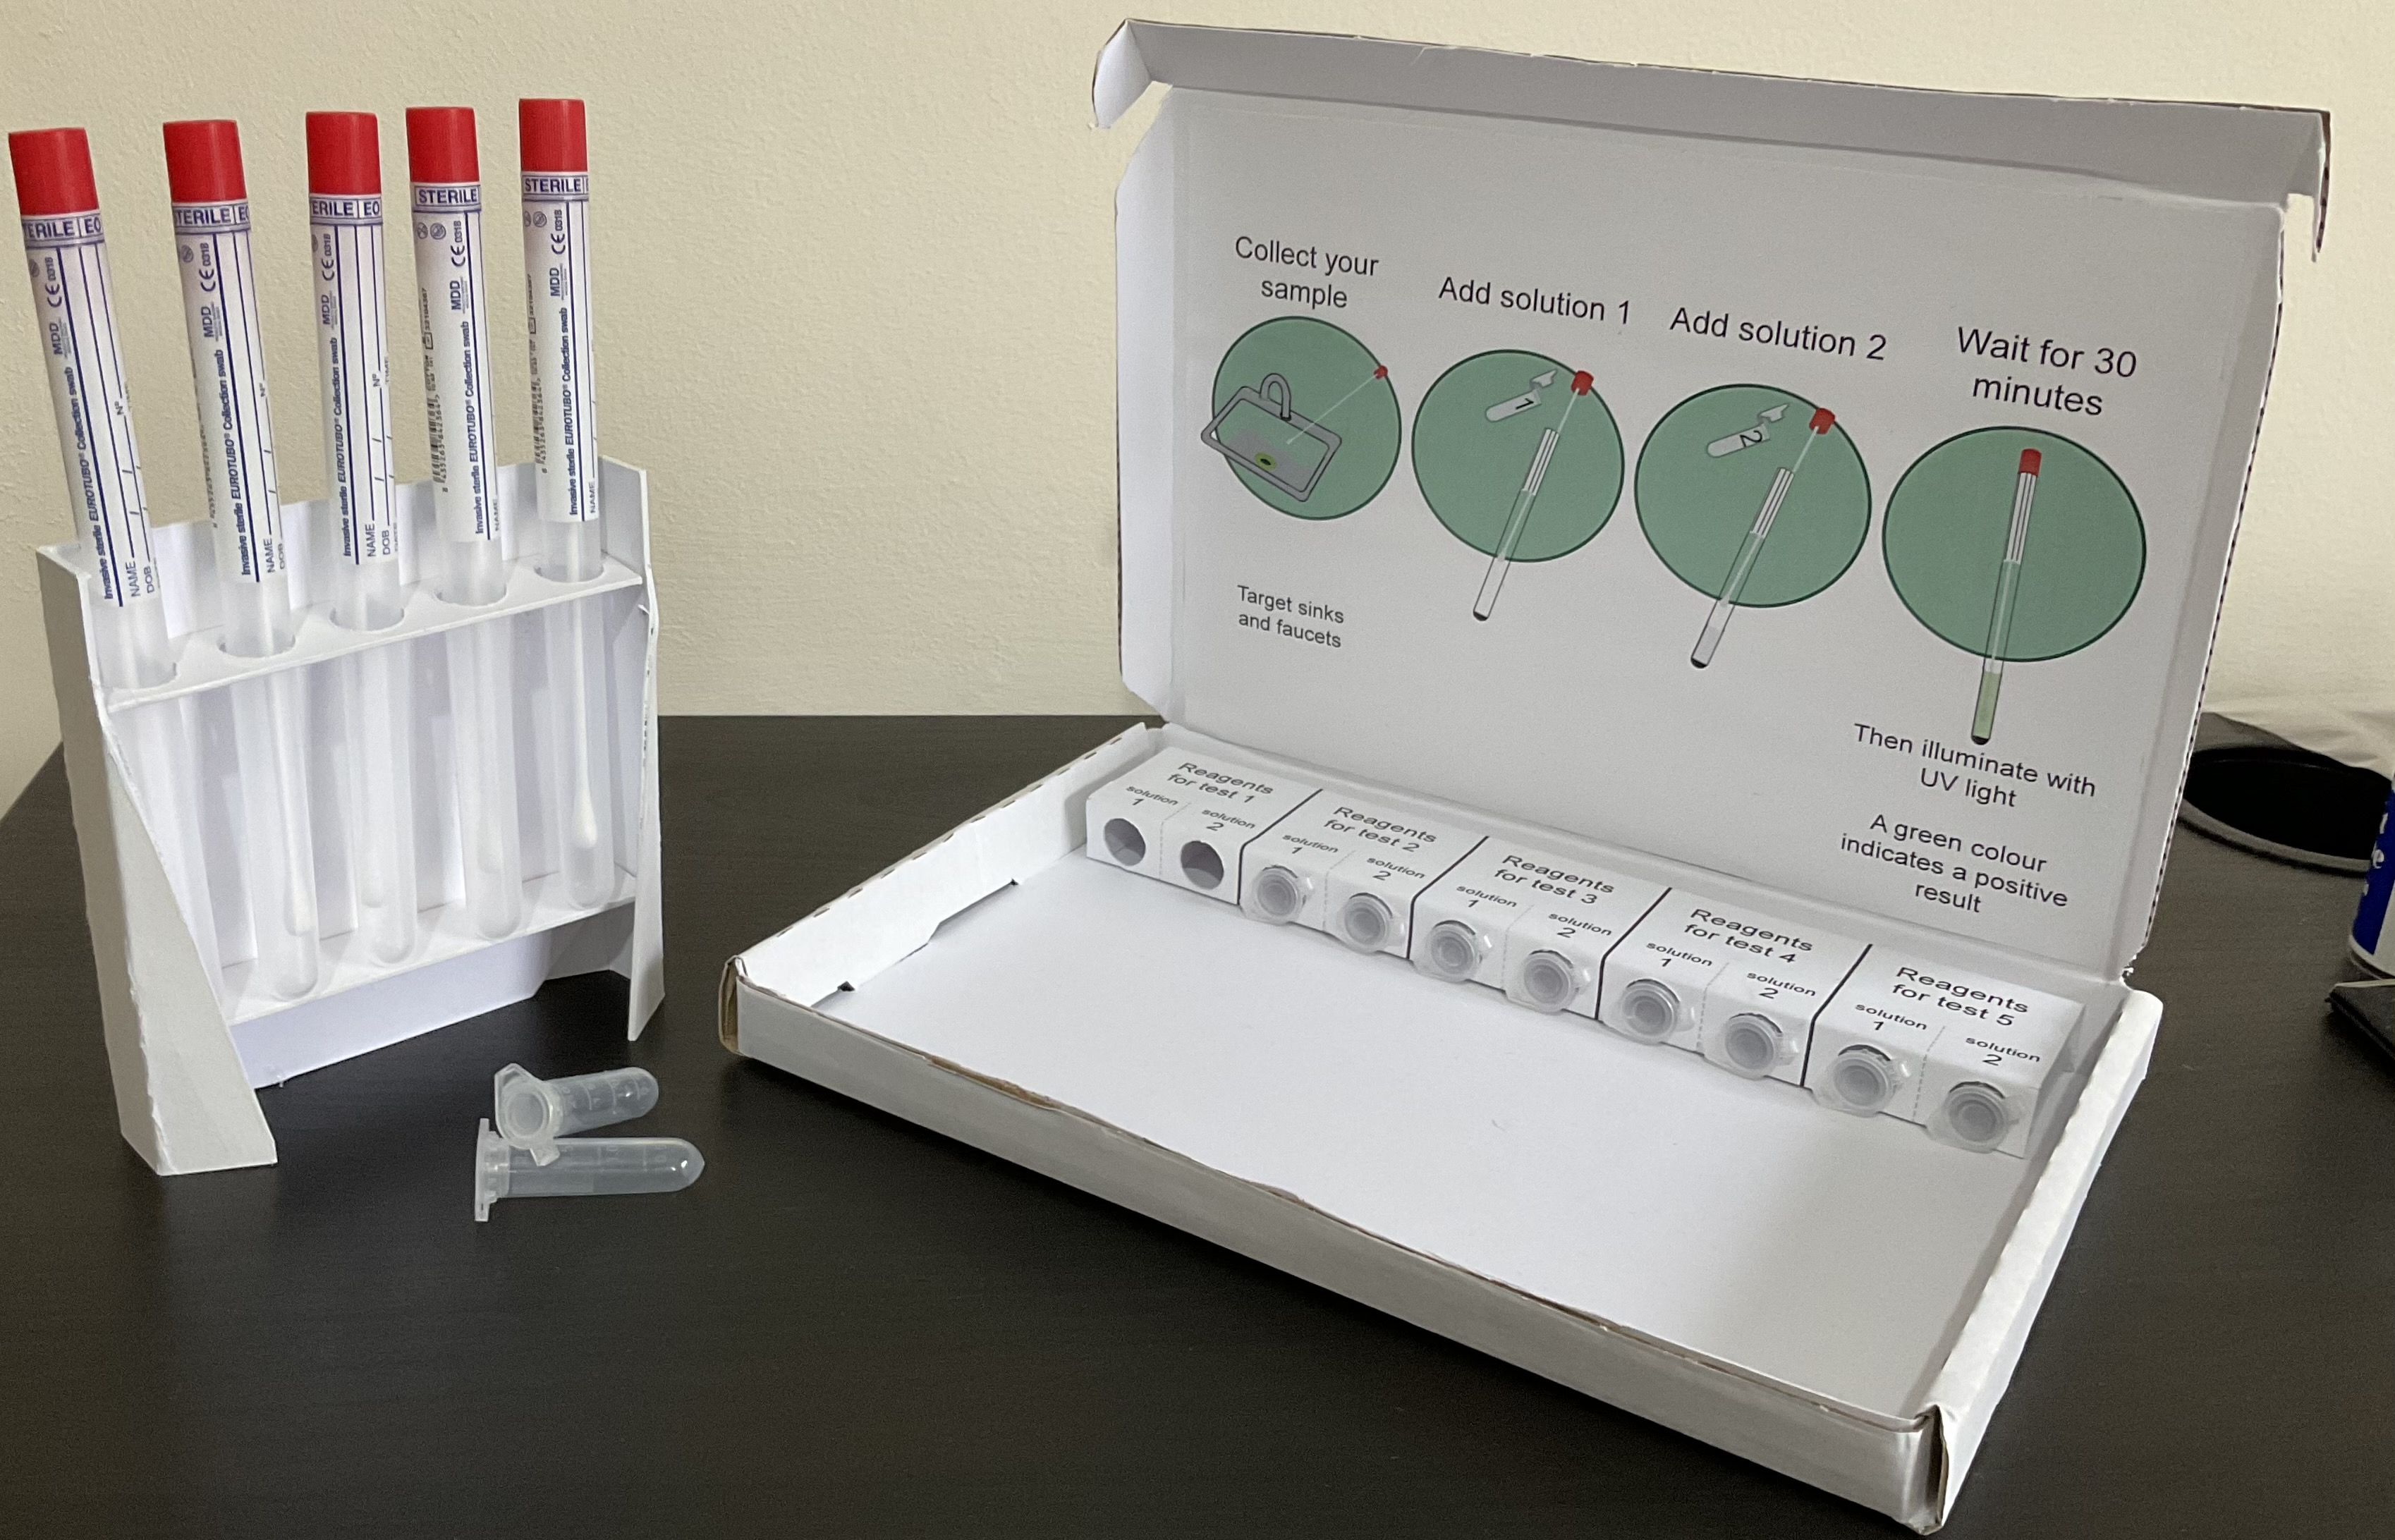 A photo of our final product - a test kit for CRE